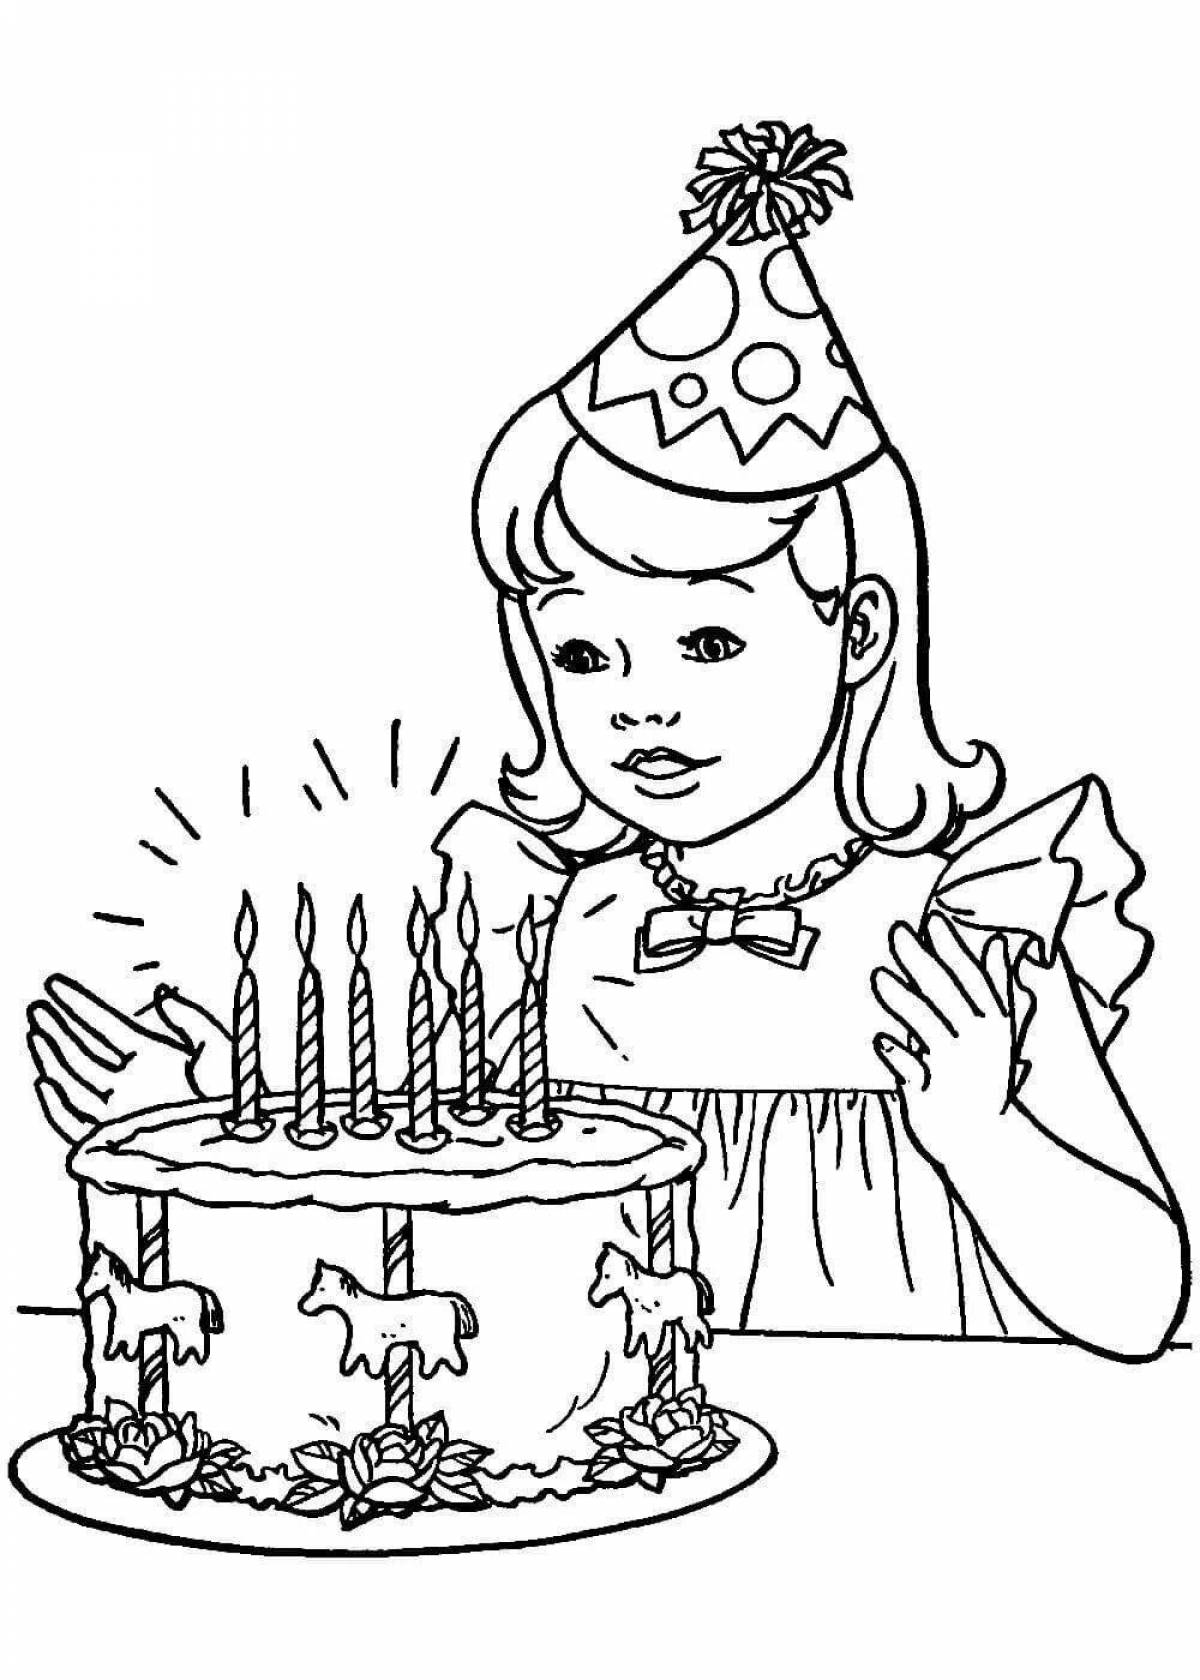 10 year birthday coloring book